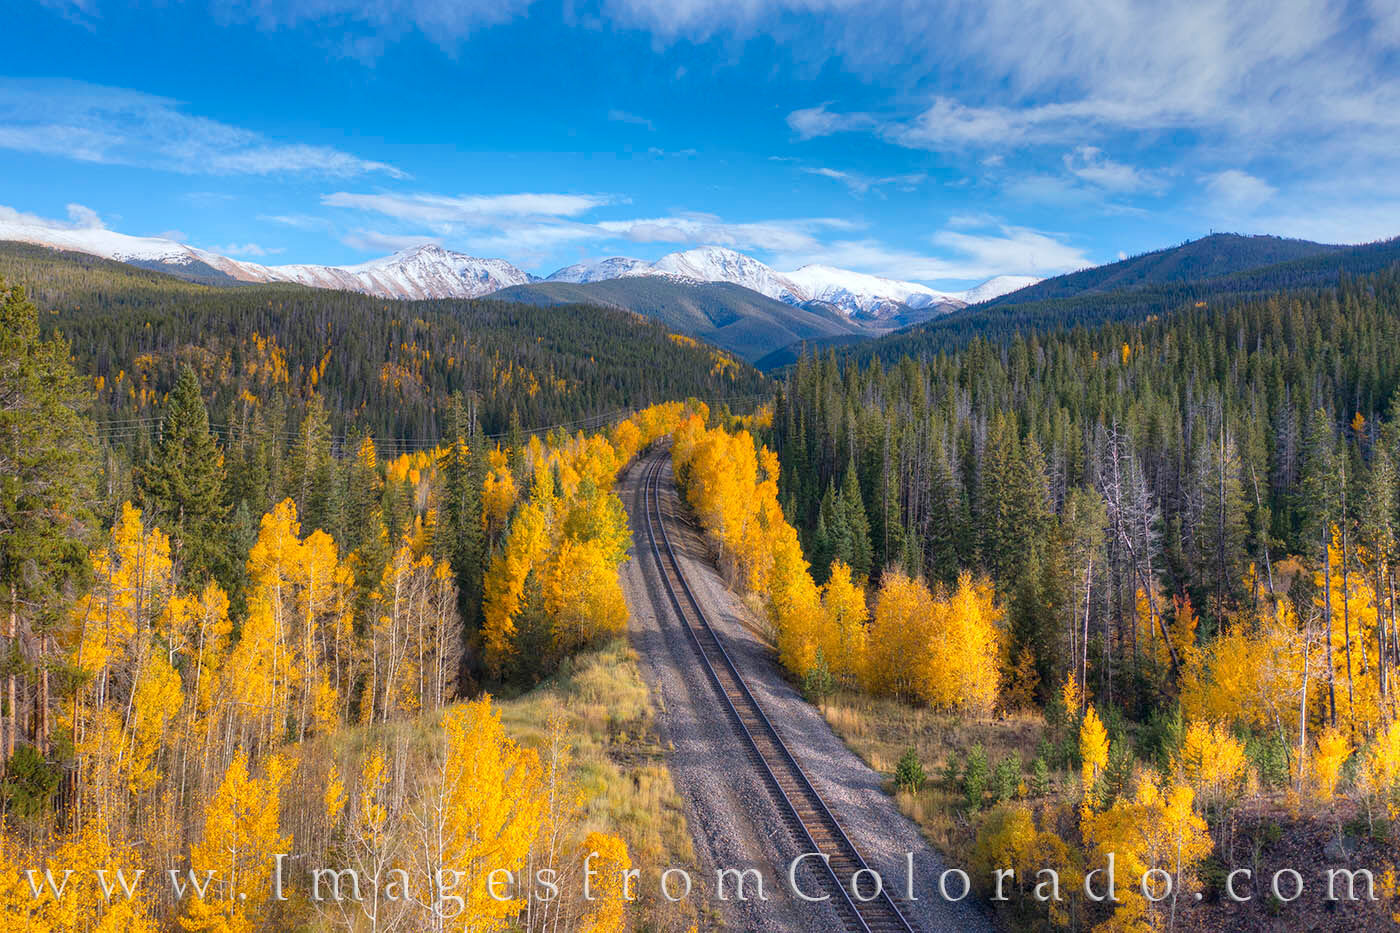 Berthoud Pass as seen on a beautiful Autumn afternoon as aspen line the train tracks along Hwy 40.